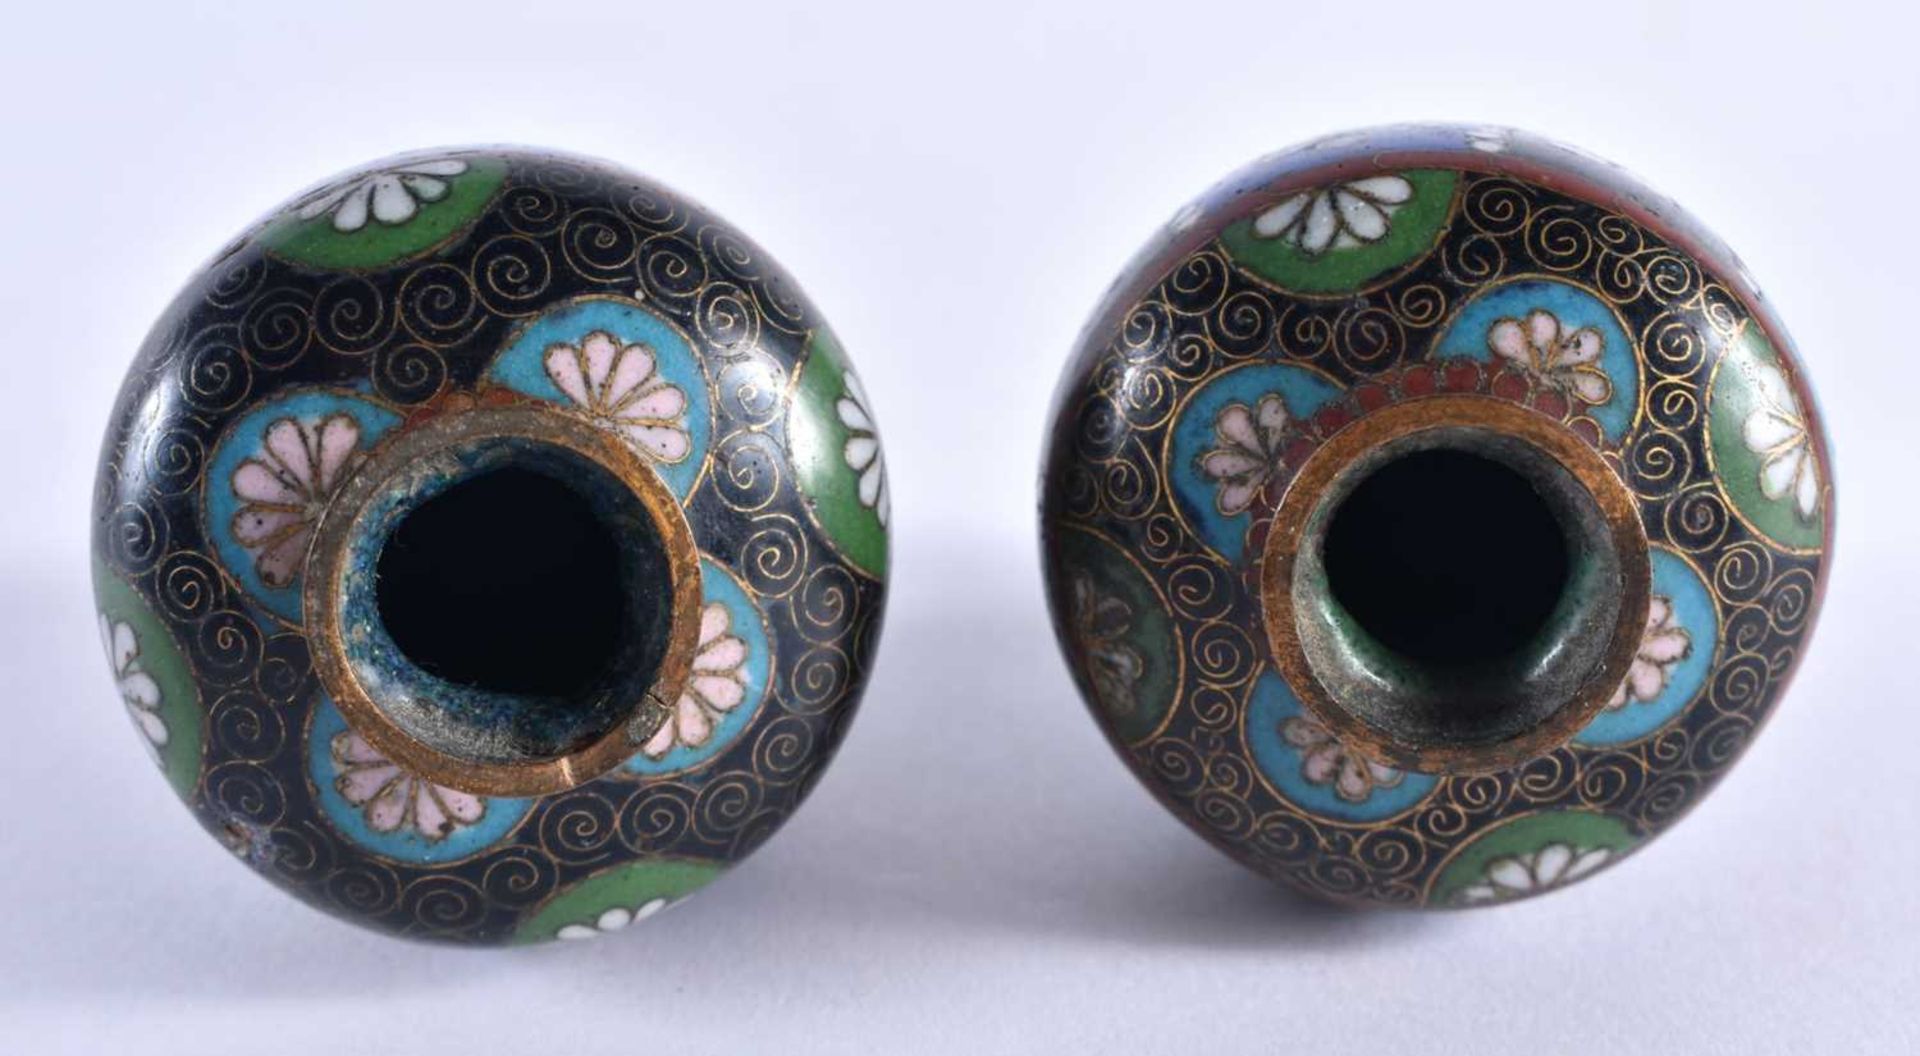 A MINIATURE PAIR OF LATE 19TH CENTURY JAPANESE MEIJI PERIOD CLOISONNE ENAMEL VASES decorated with - Image 4 of 5